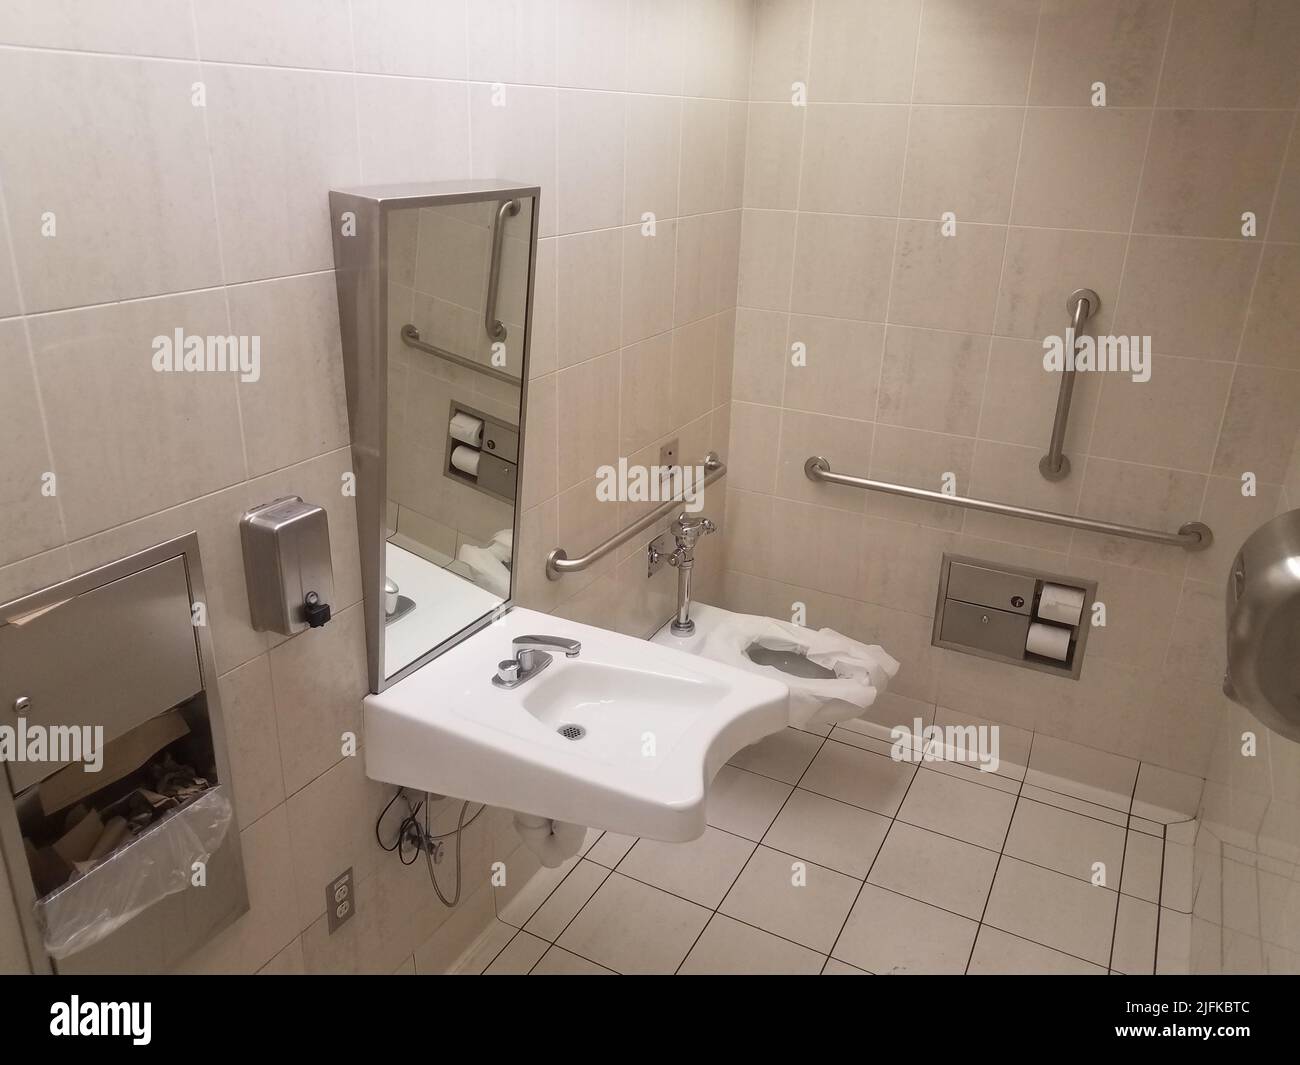 bathroom or restroom toilet with paper and metal railings and sink. Stock Photo